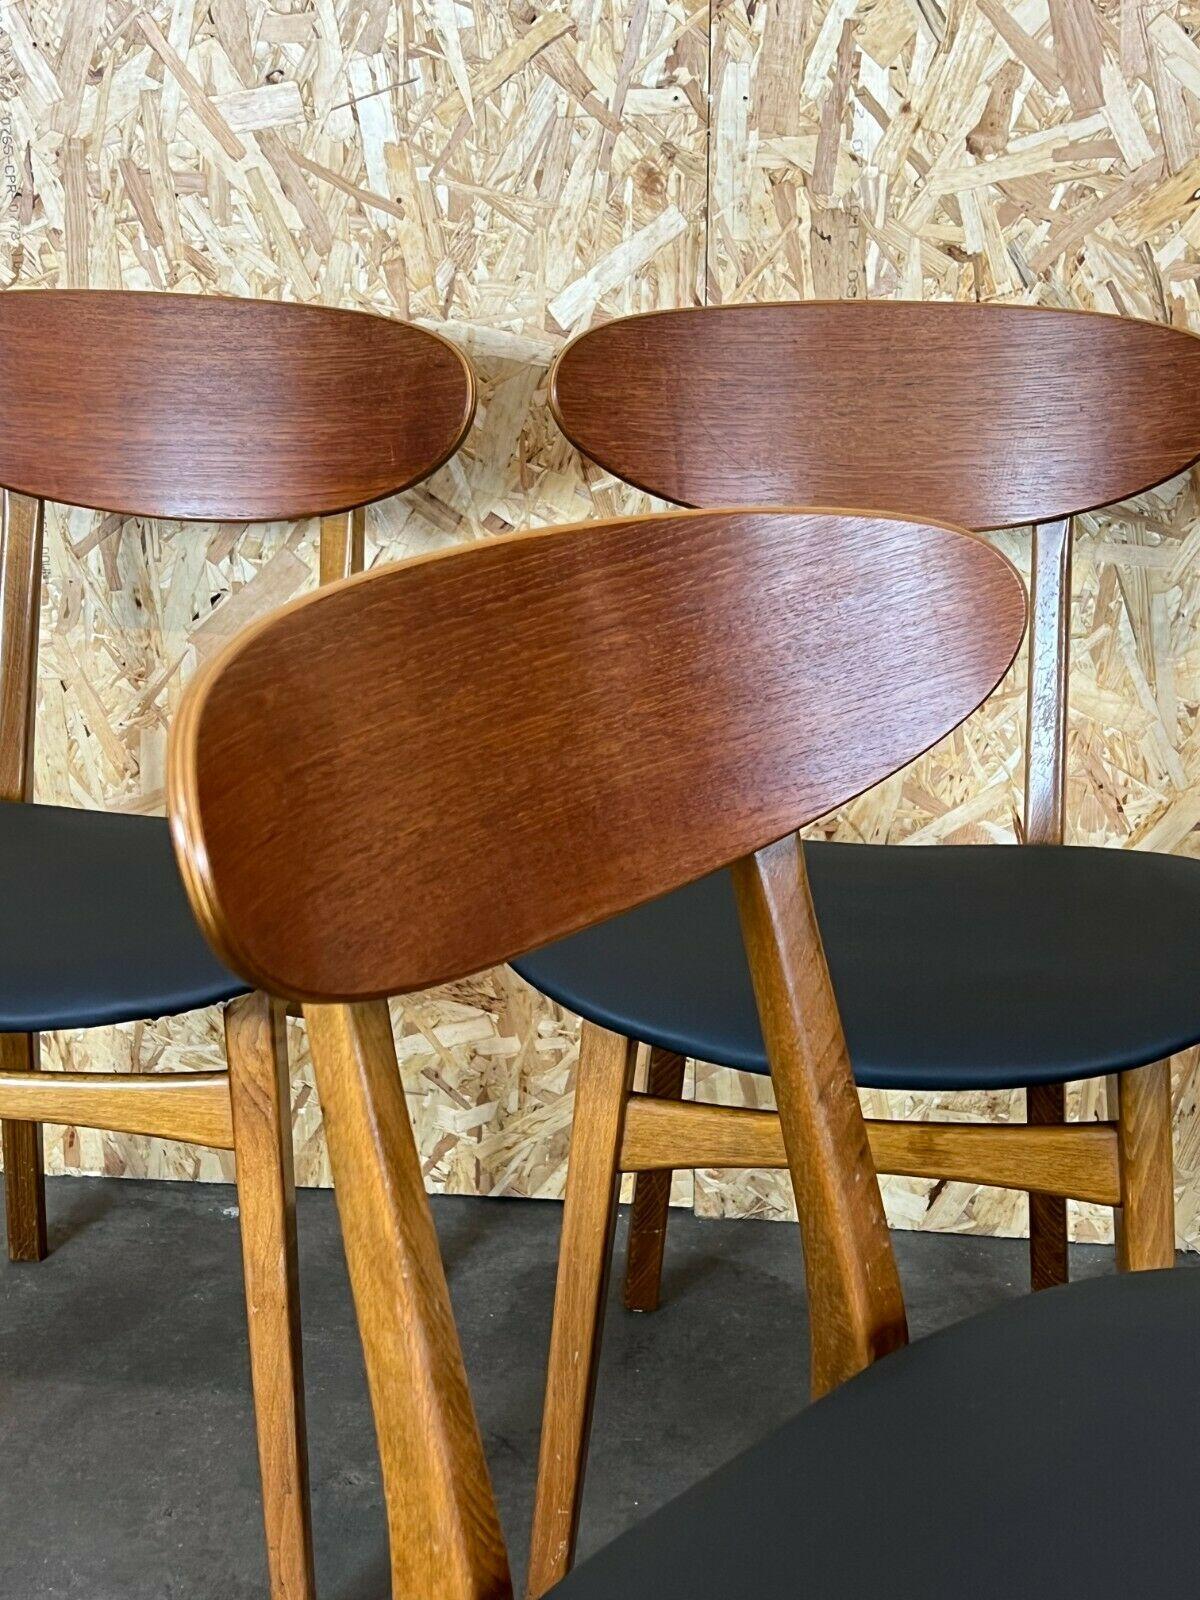 4x 60s 70s Teak Chairs Dining Chair Danish Modern Design 60s In Good Condition For Sale In Neuenkirchen, NI